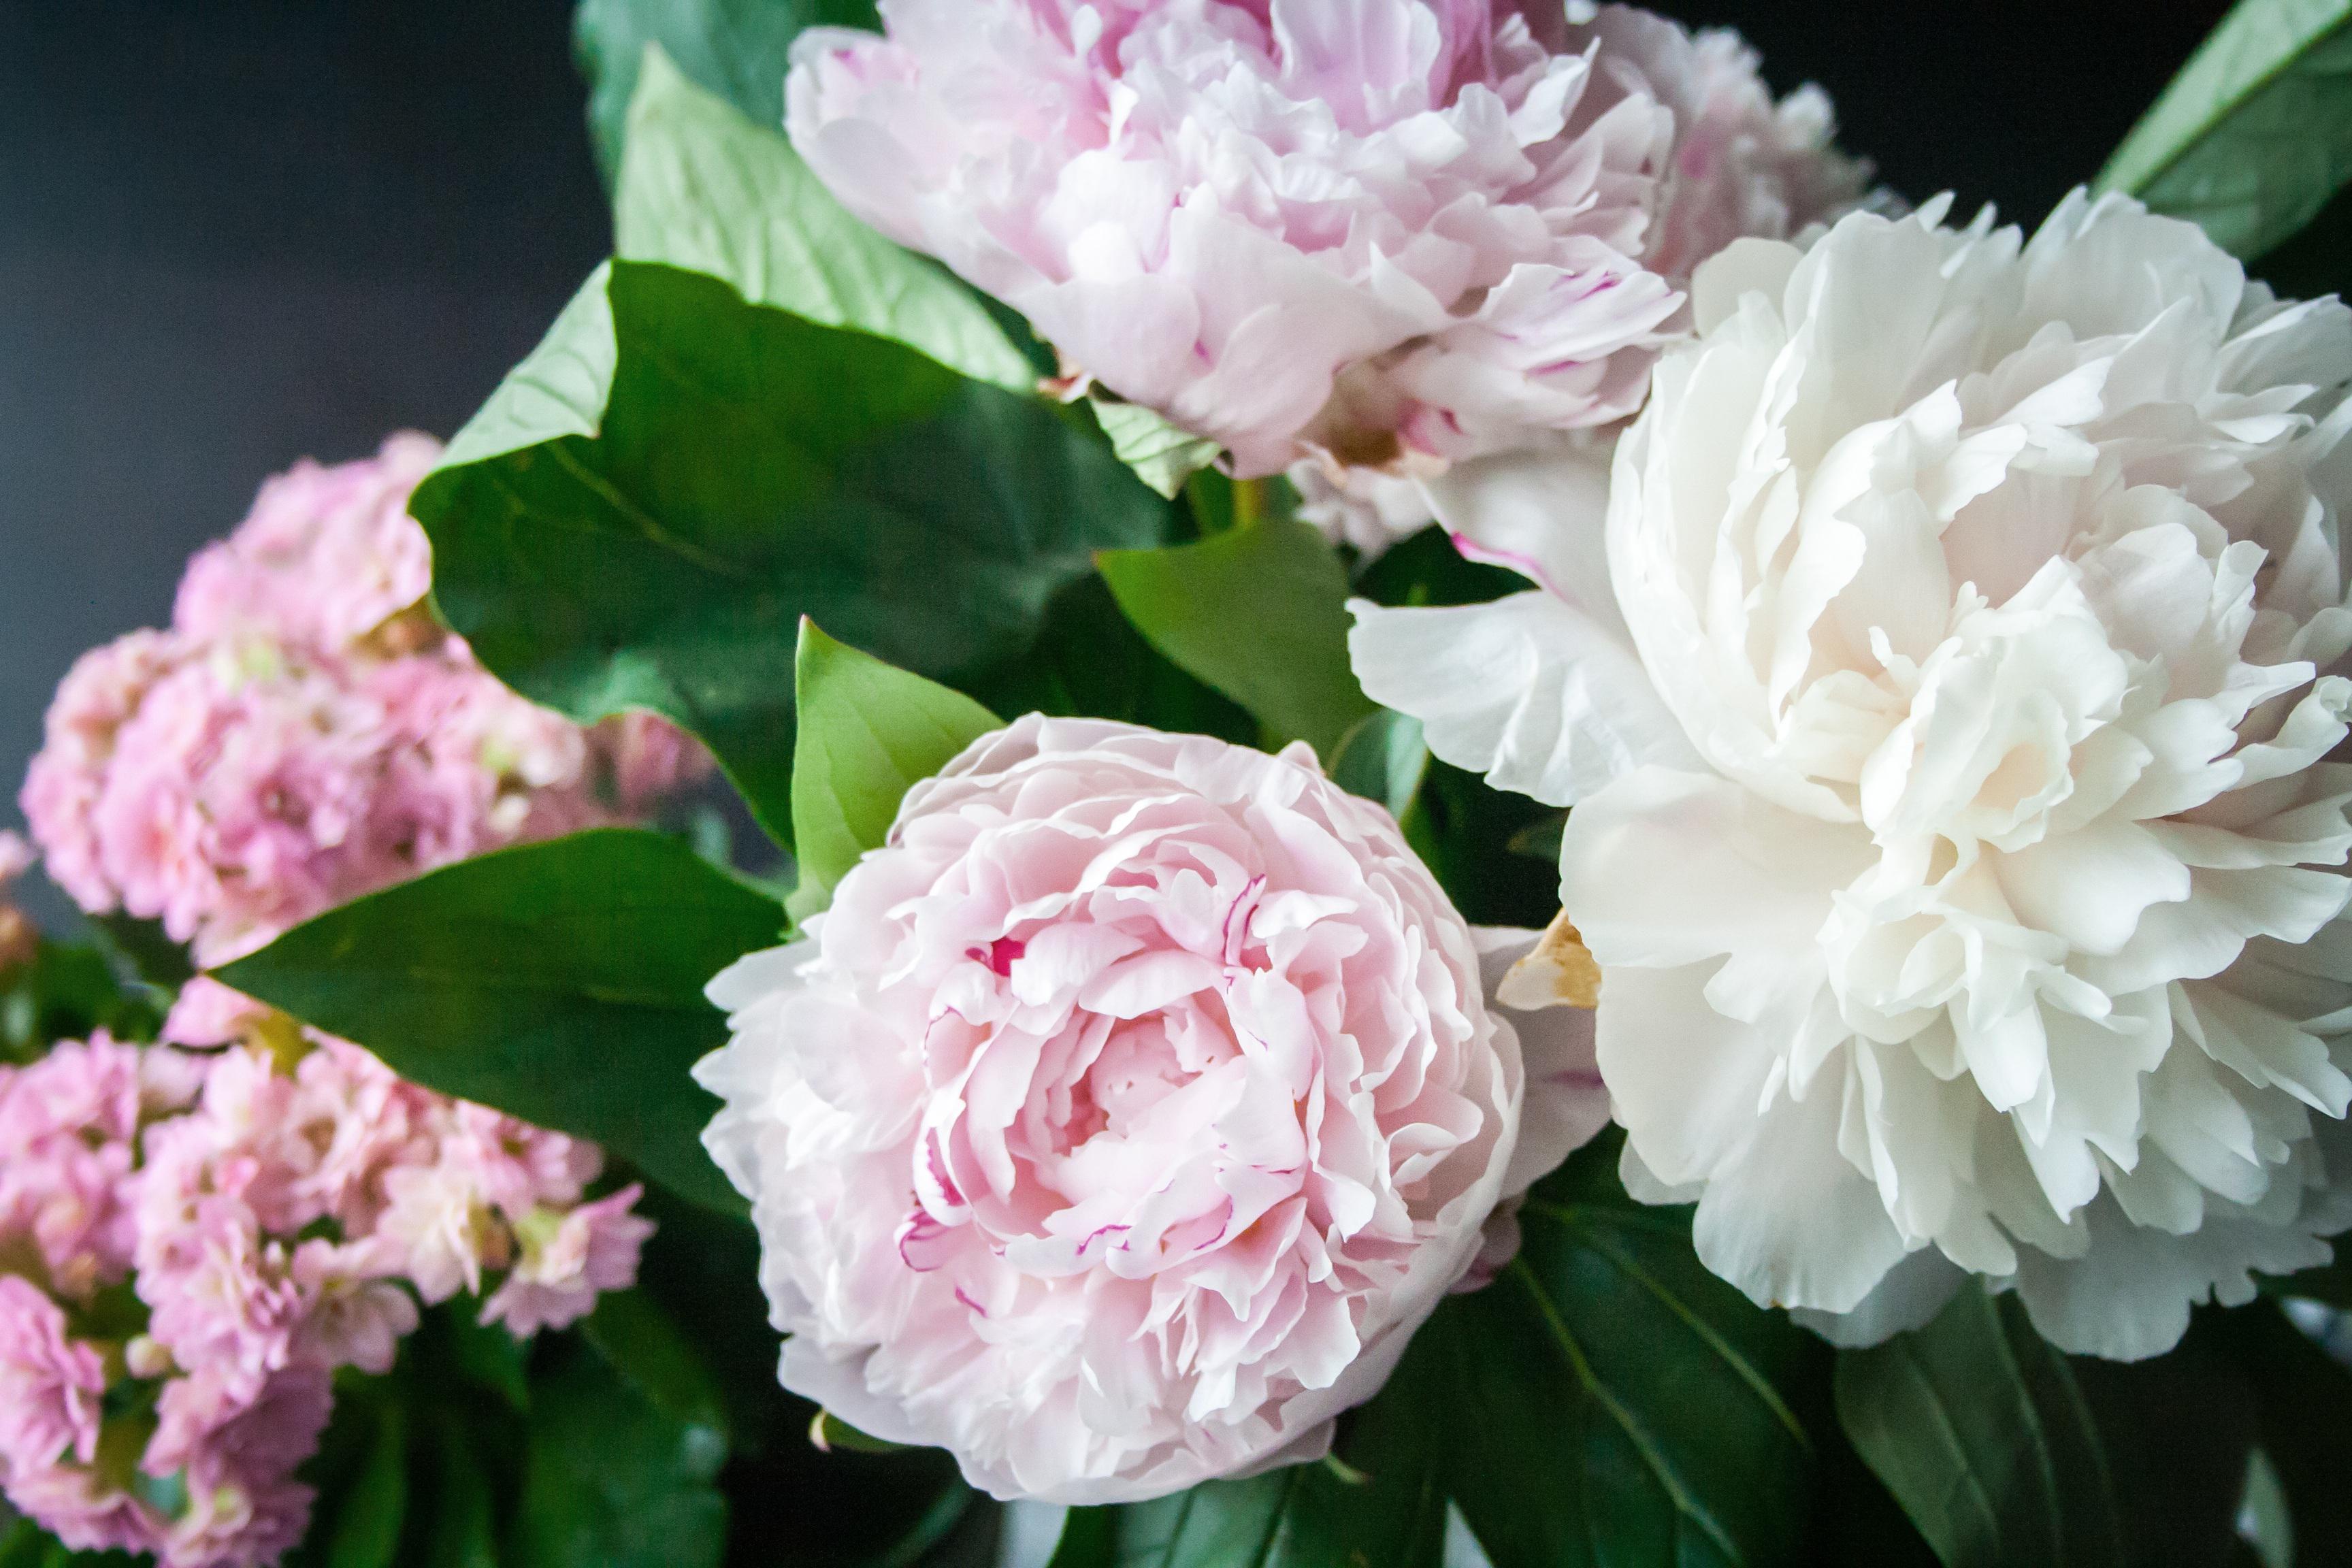 Hymns Without Words - Peonies